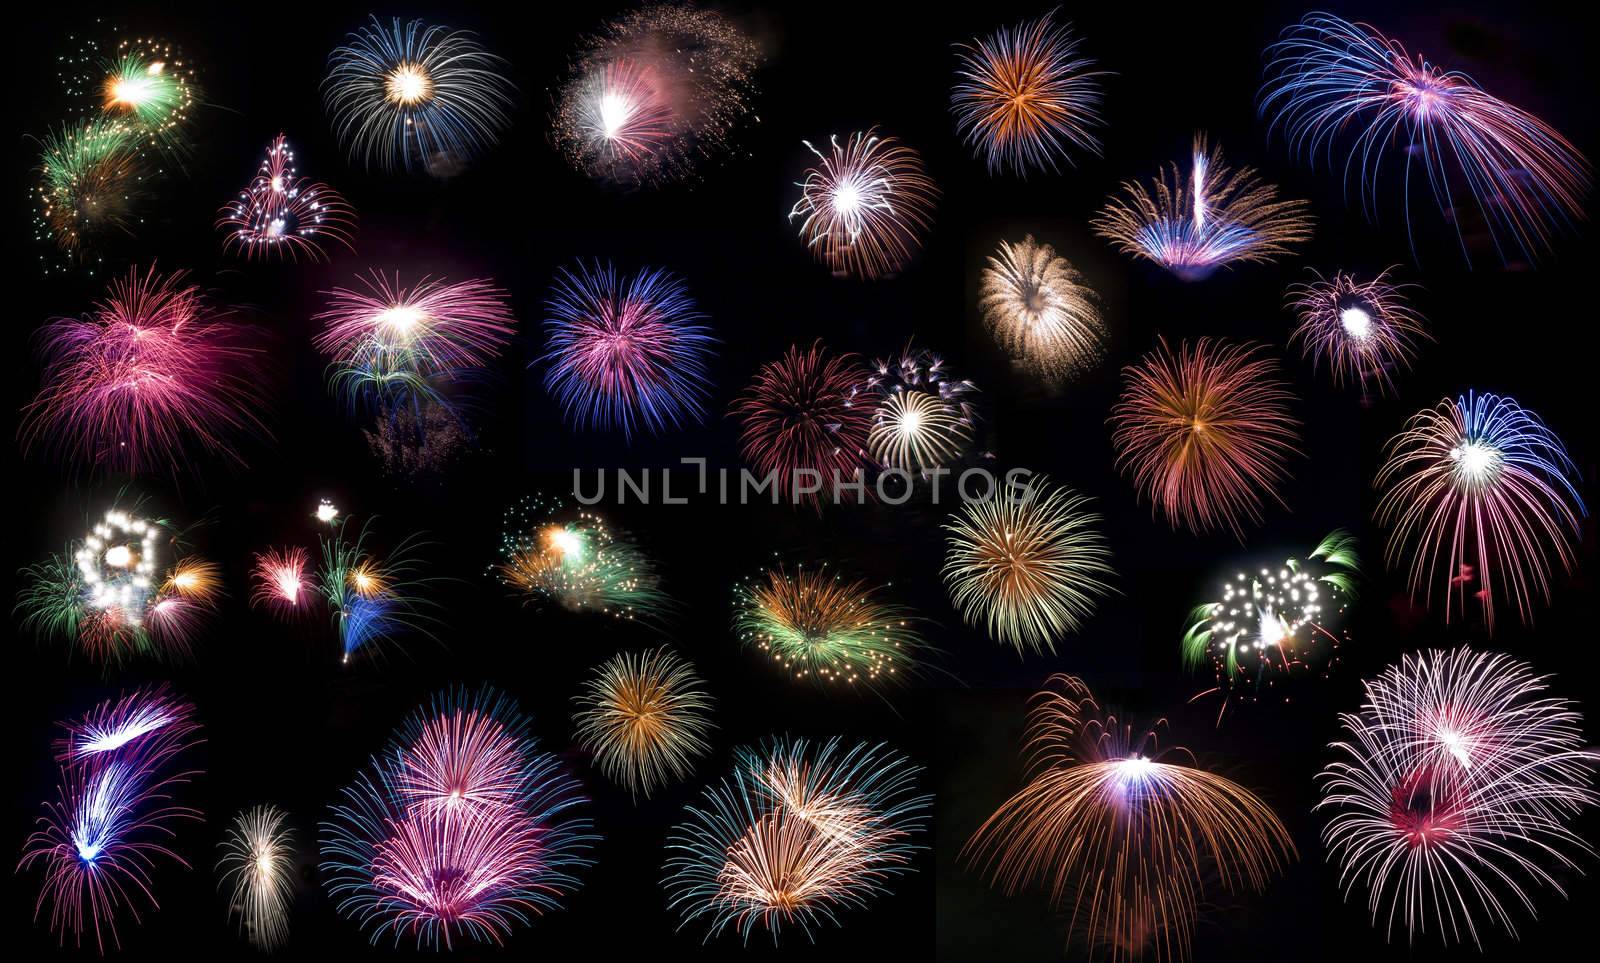 Template including various types of fireworks over a black background